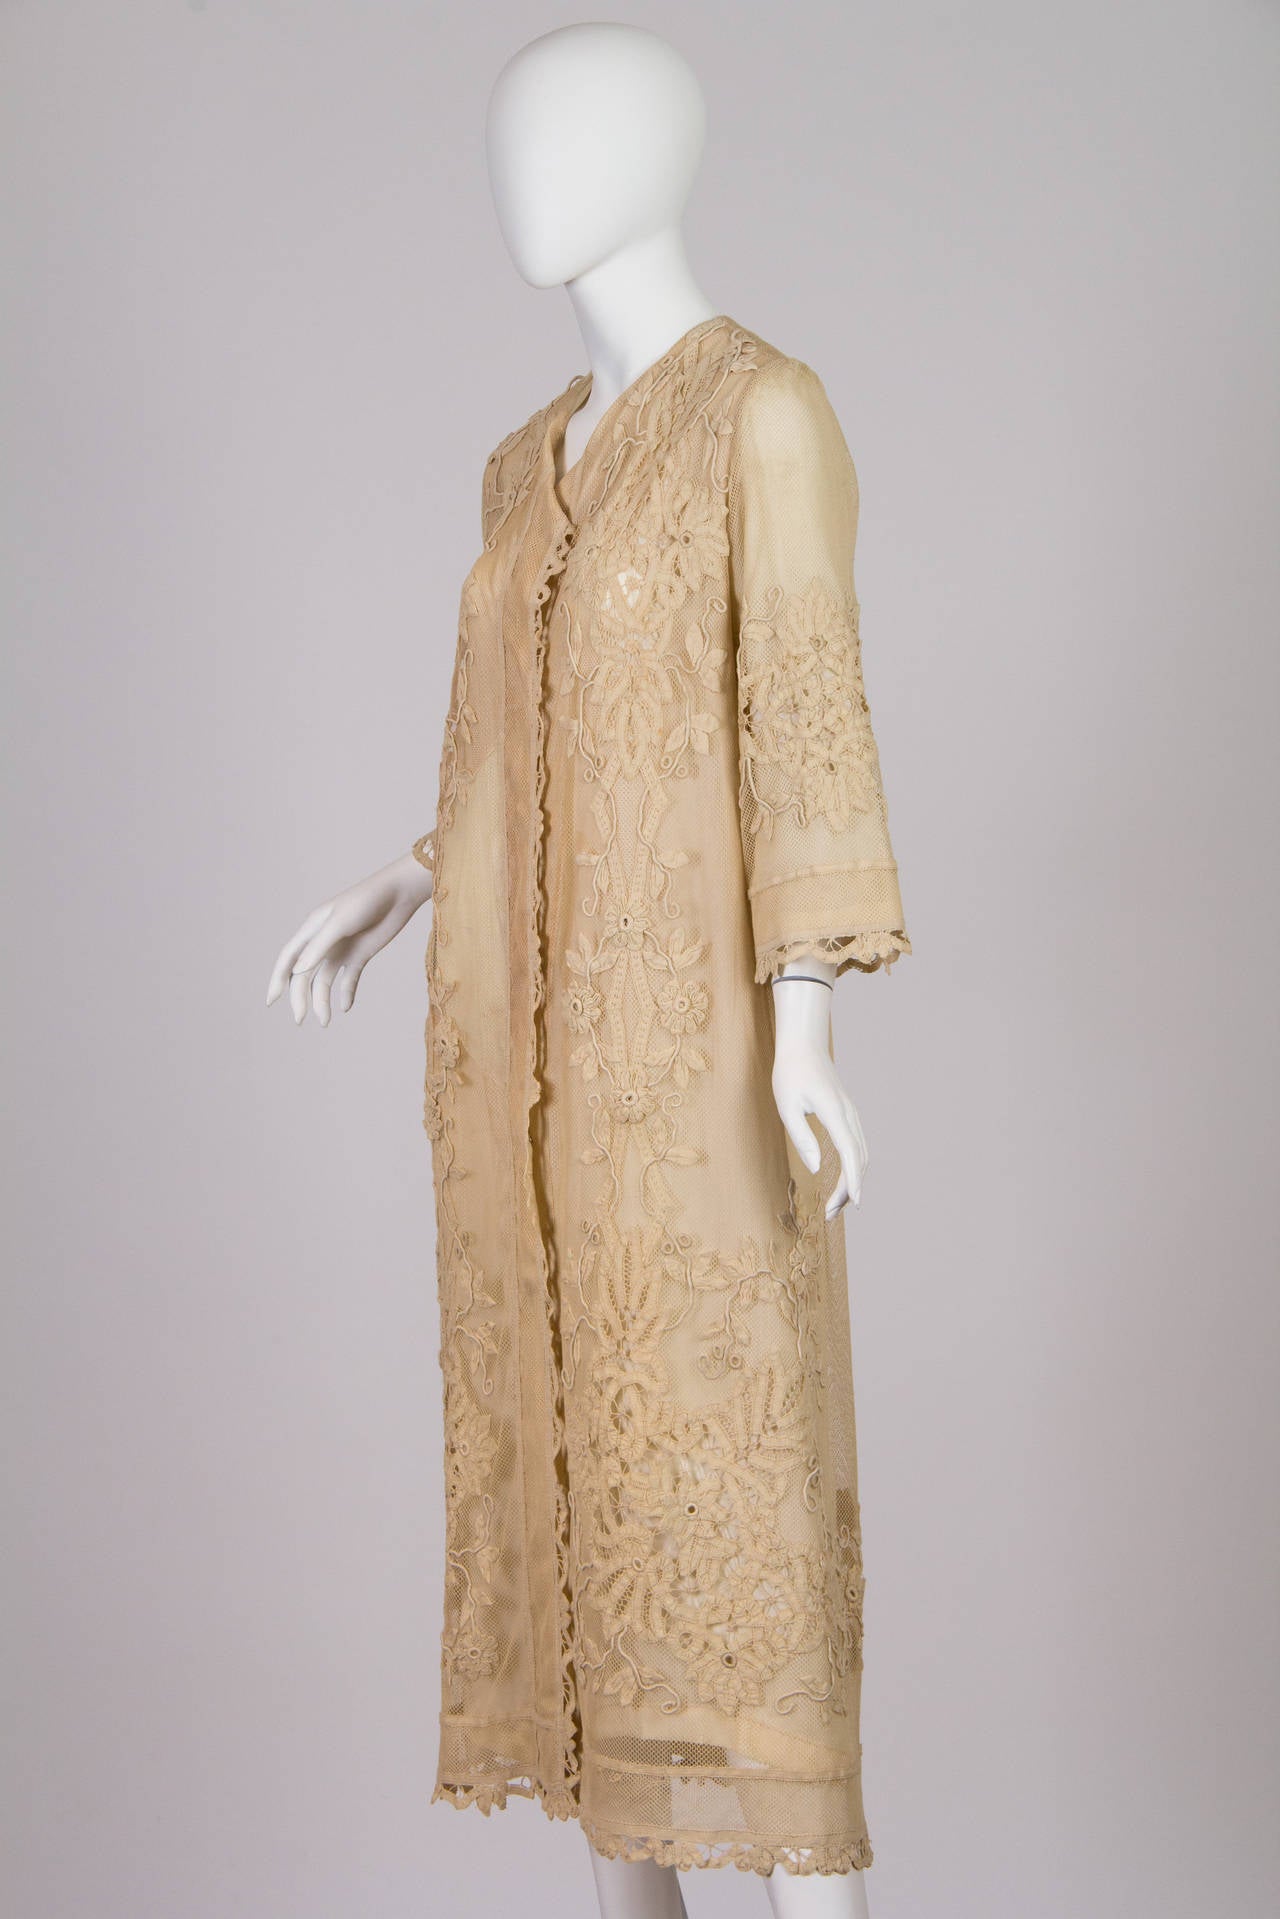 This is a lovely jacket-style dress made in the 1920s from earlier lace. The lace is a combination of Battenburg (or ribbon lace) and mesh, and is dark ivory in colour. The lace, while delicate in appearance, is in excellent condition. The straight